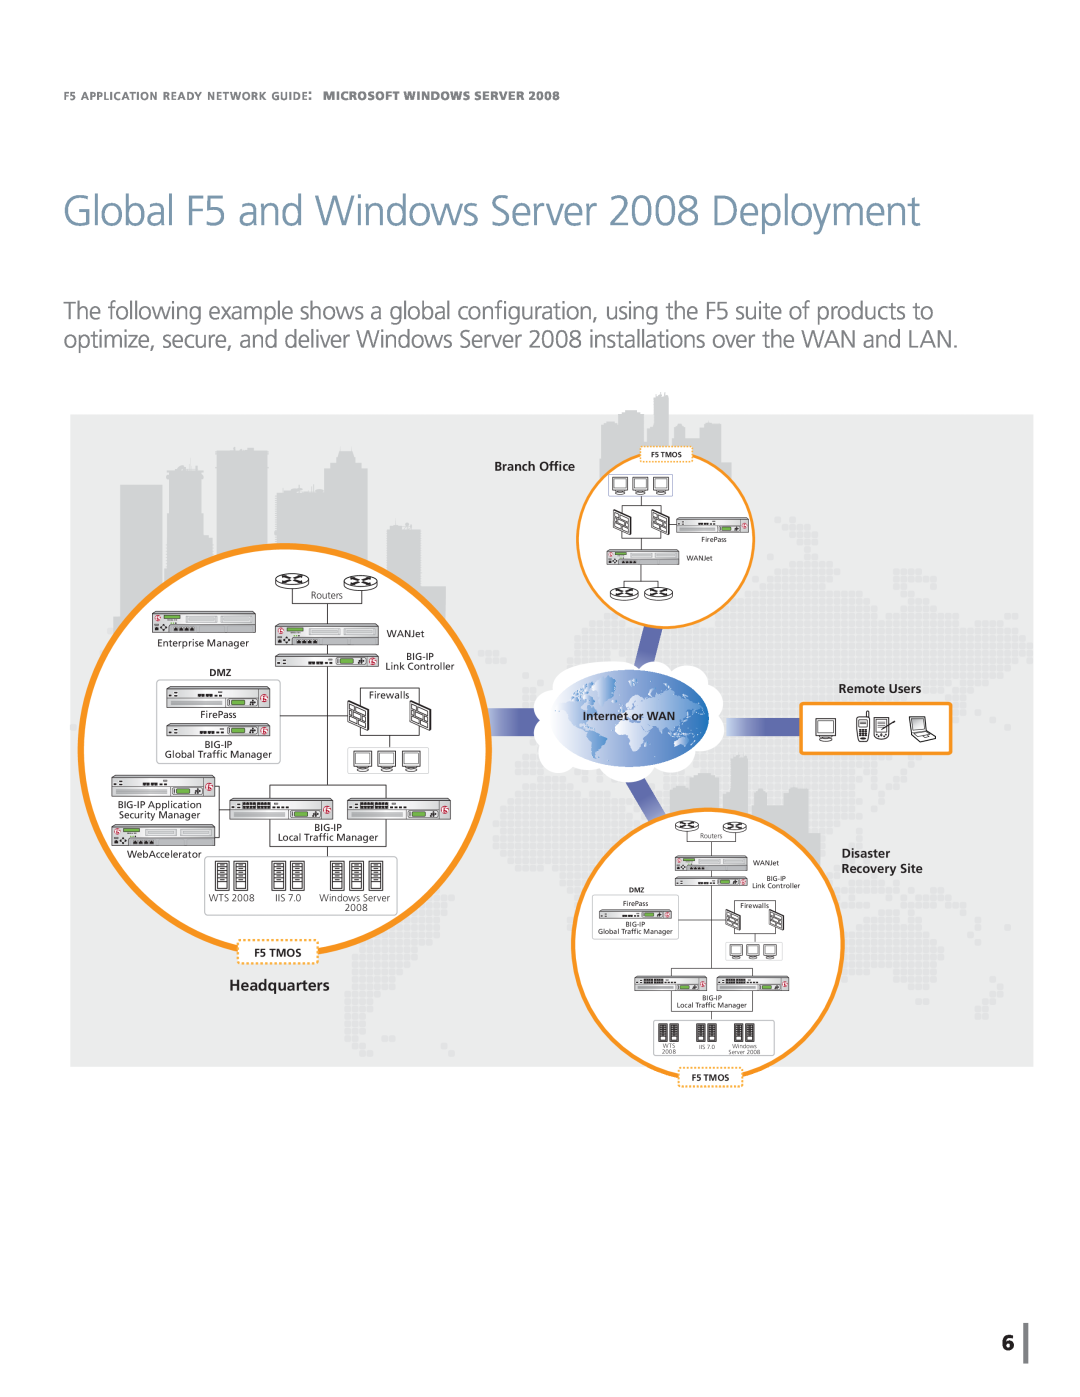 Microsoft 22809175 manual Global F5 and Windows Server 2008 Deployment, Headquarters, Branch Ofﬁce, Remote Users, Disaster 